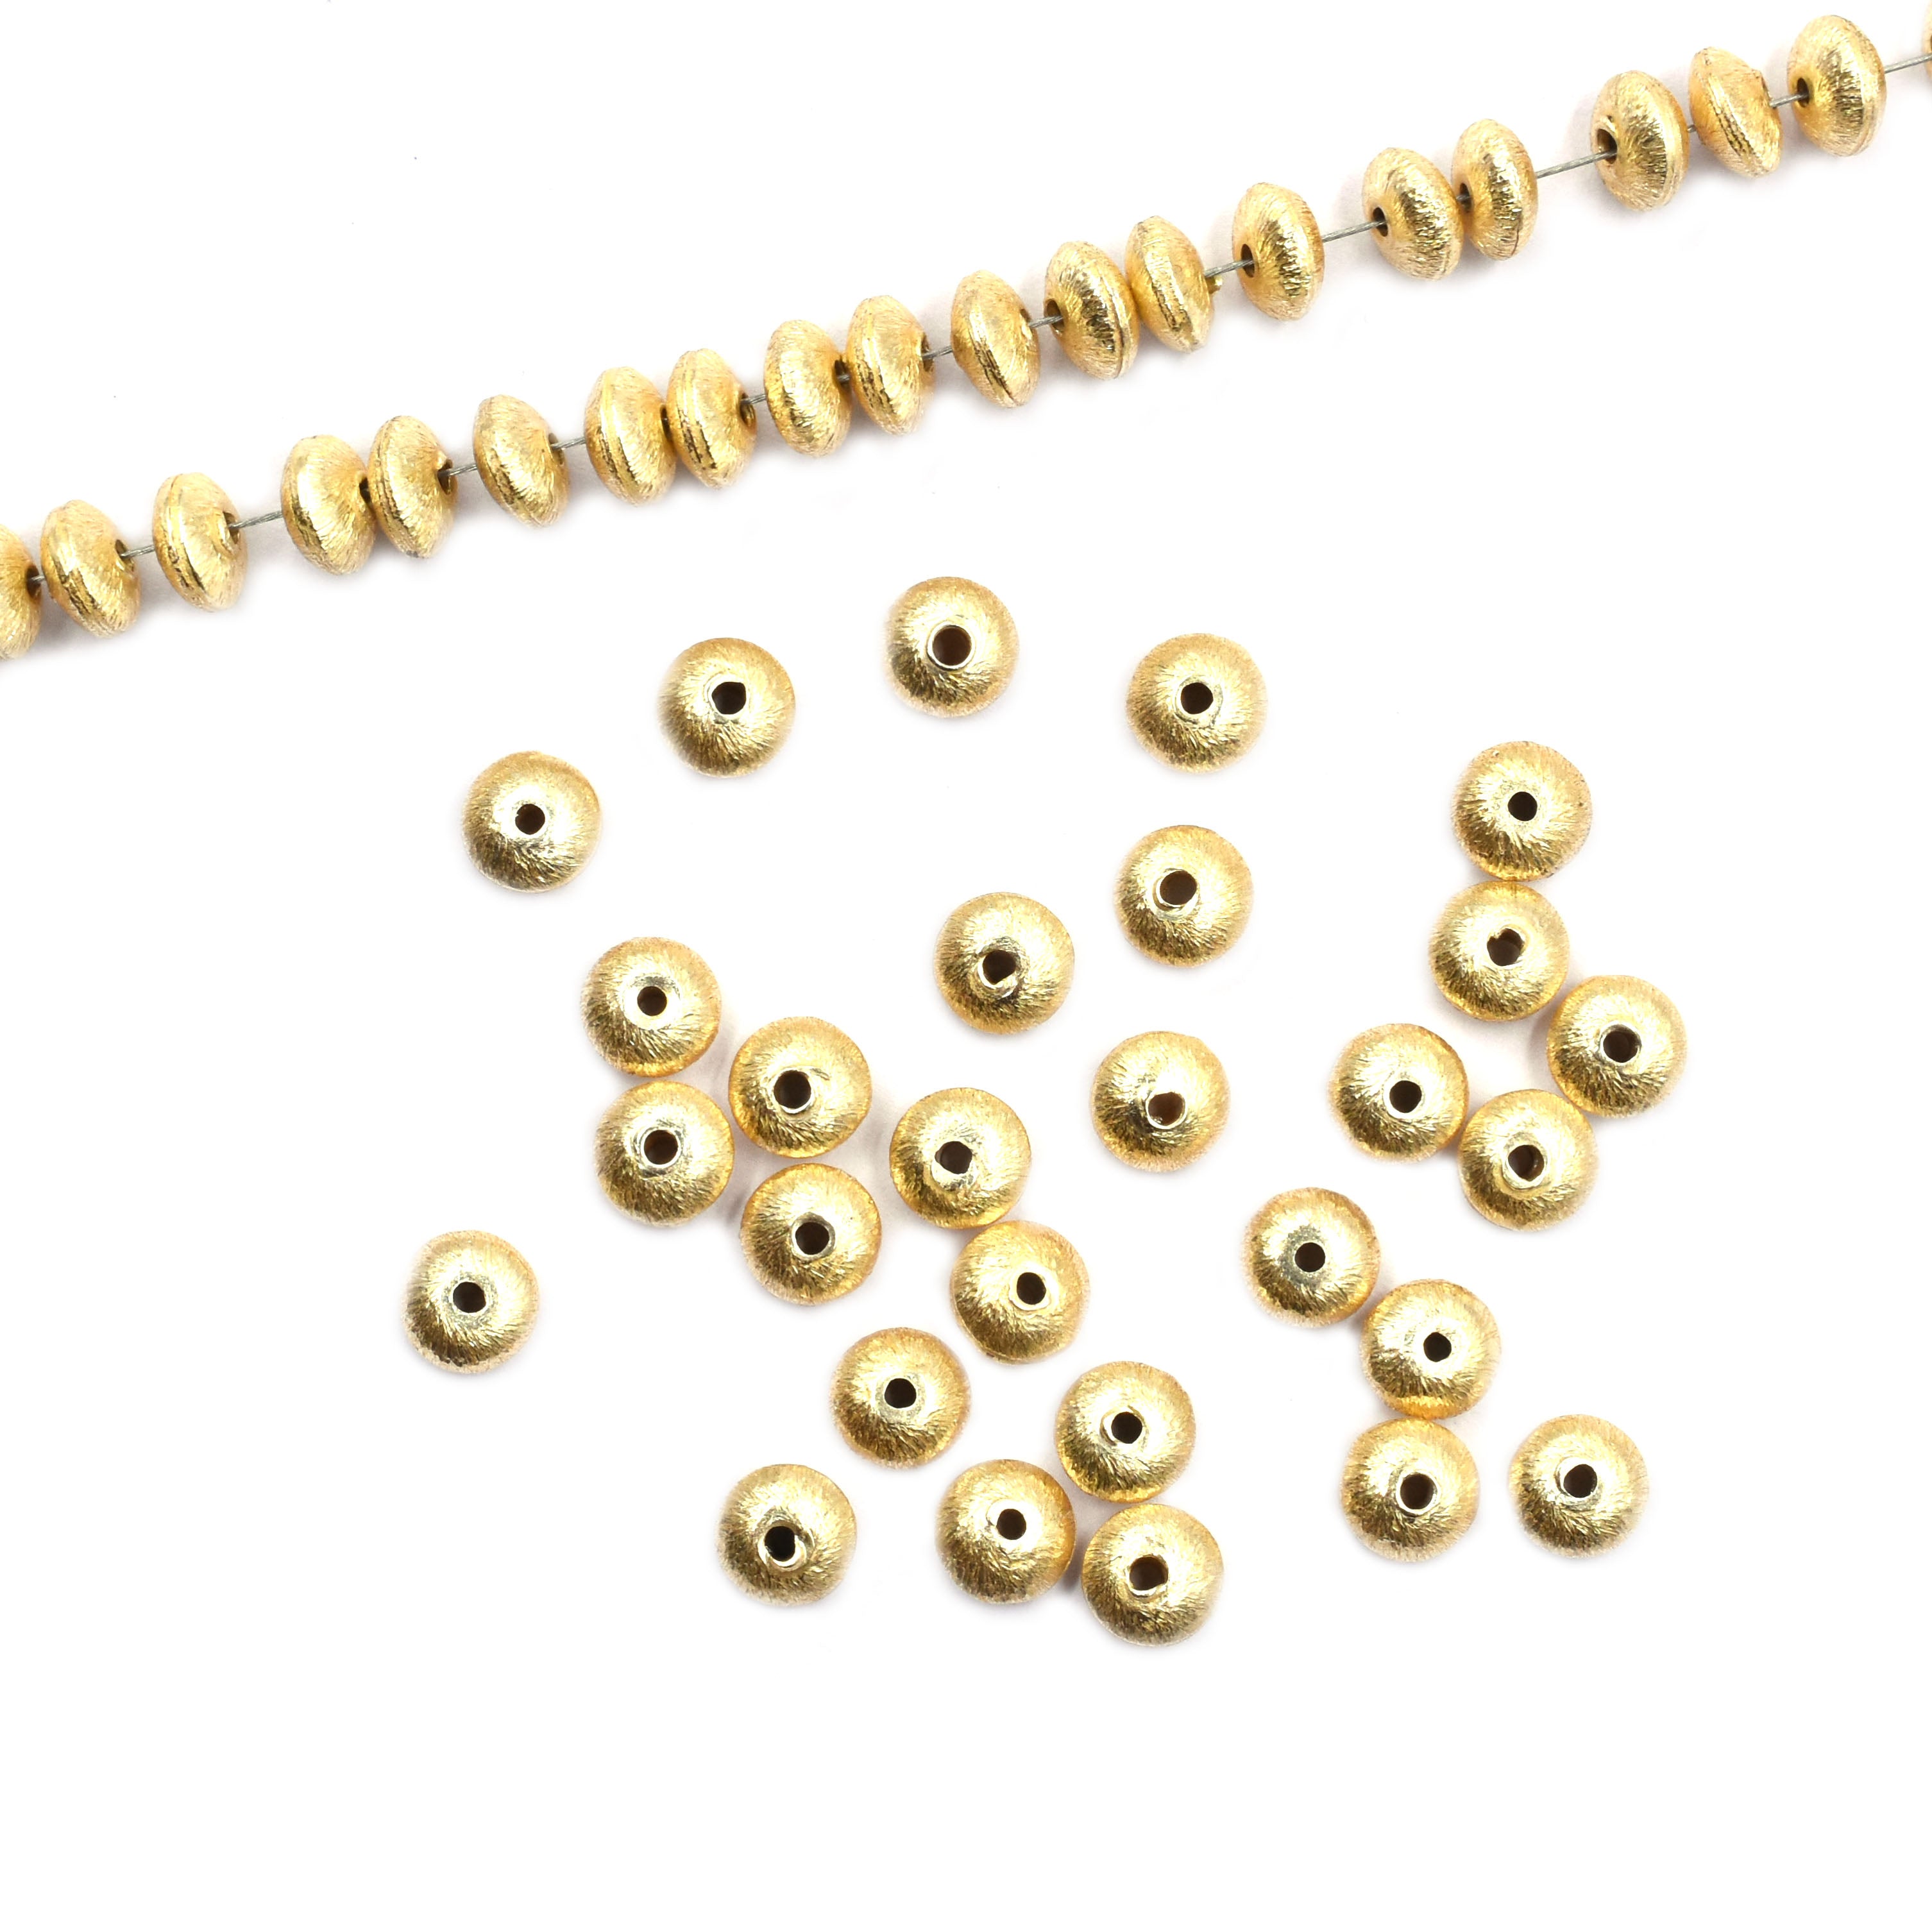 100 Pcs 6mm Spacer Brushed Matte Finish Beads Gold Plated Copper